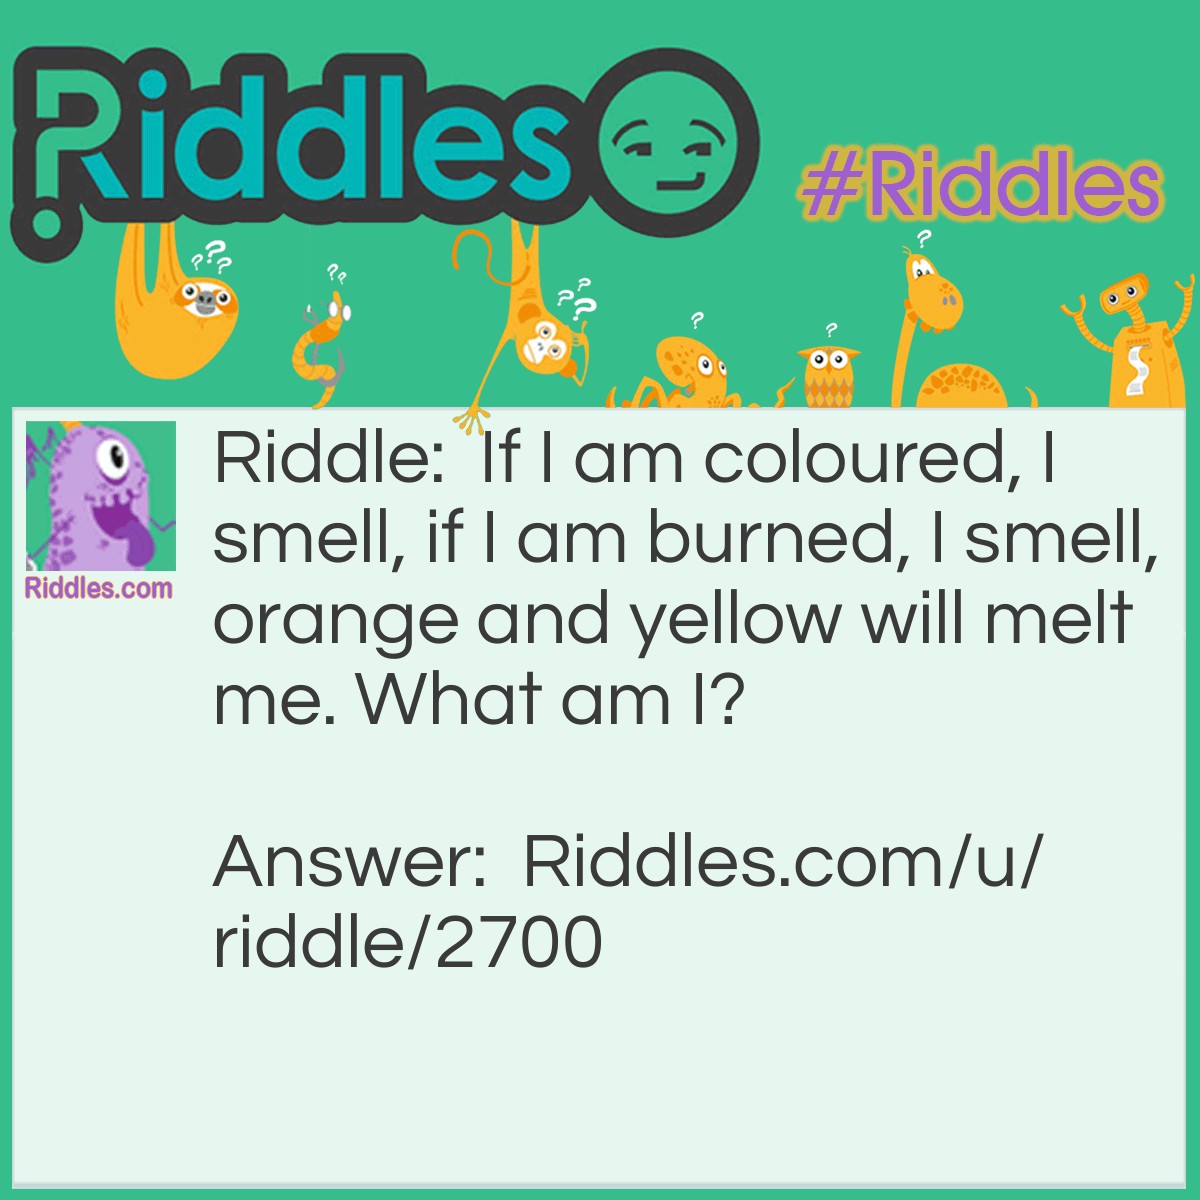 Riddle: If I am coloured, I smell, if I am burned, I smell, orange and yellow will melt me. What am I? Answer: A Candle.